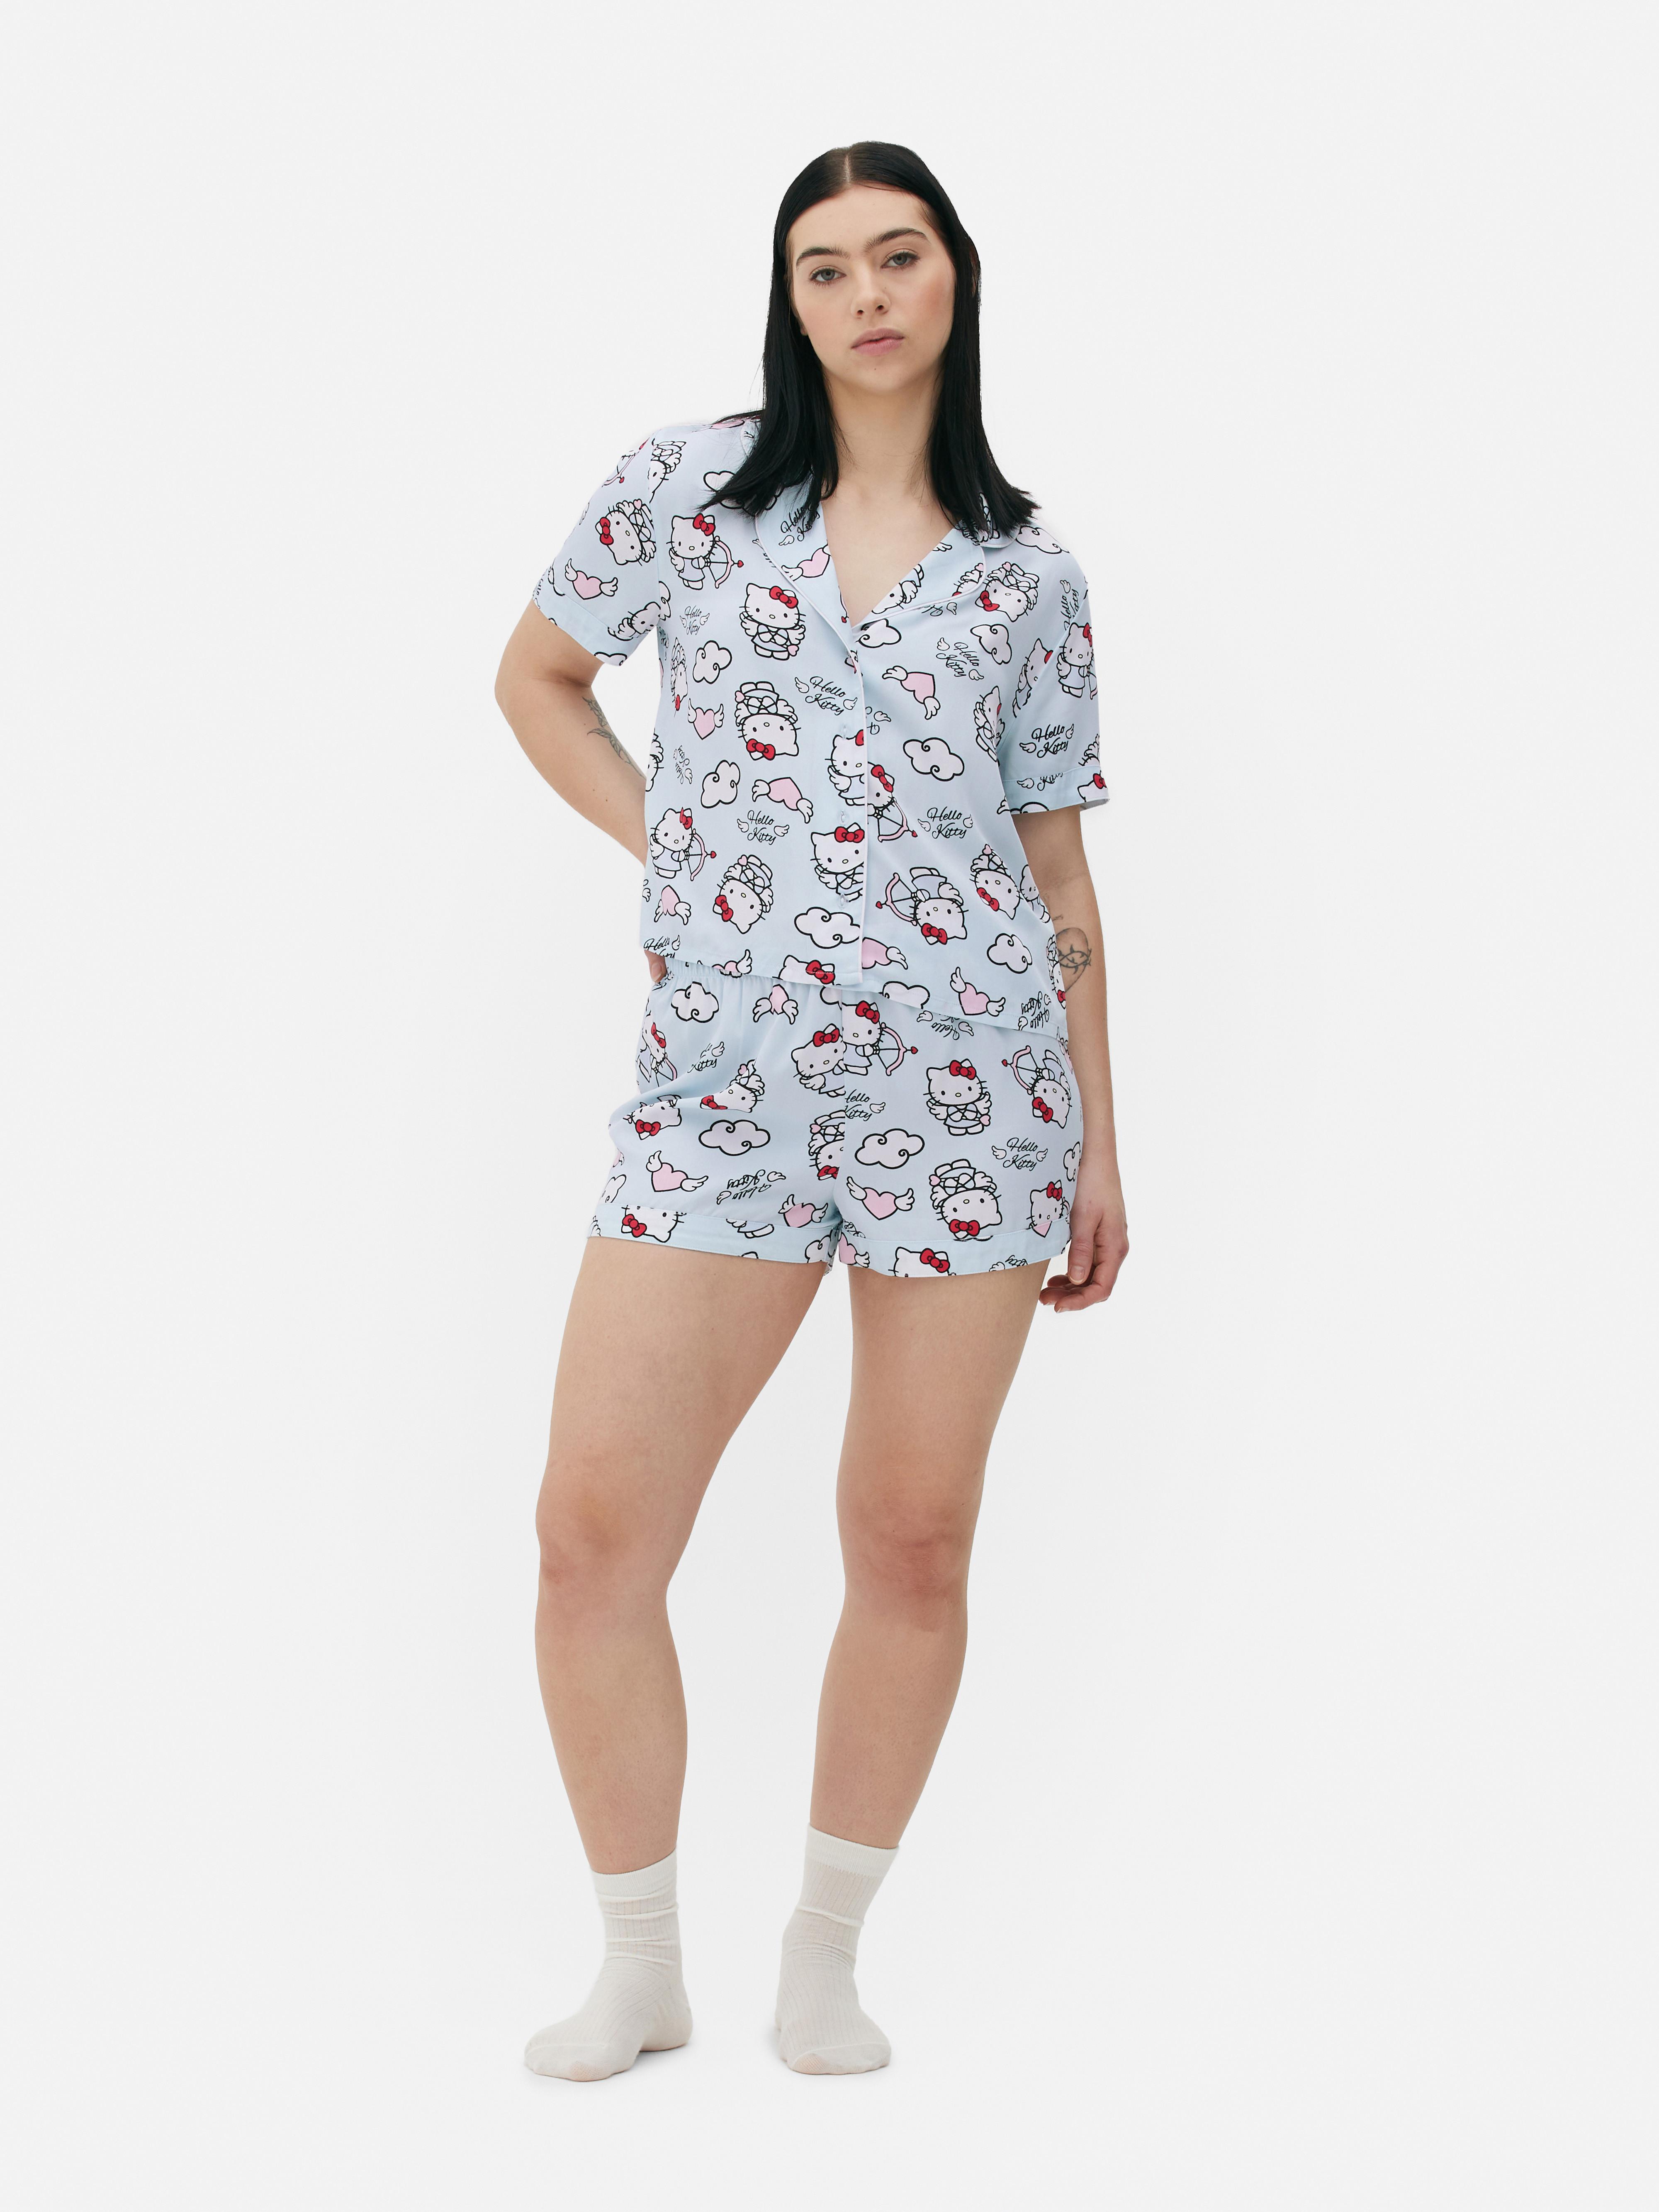 DOBREVA Womens Cotton Pajama Set With Long Sleeve Blanket Hoodie Primark  And Tie Dye Pants Loose Fit Loungewear Kit For Plus Size Women 231122 From  Mang04, $39.59